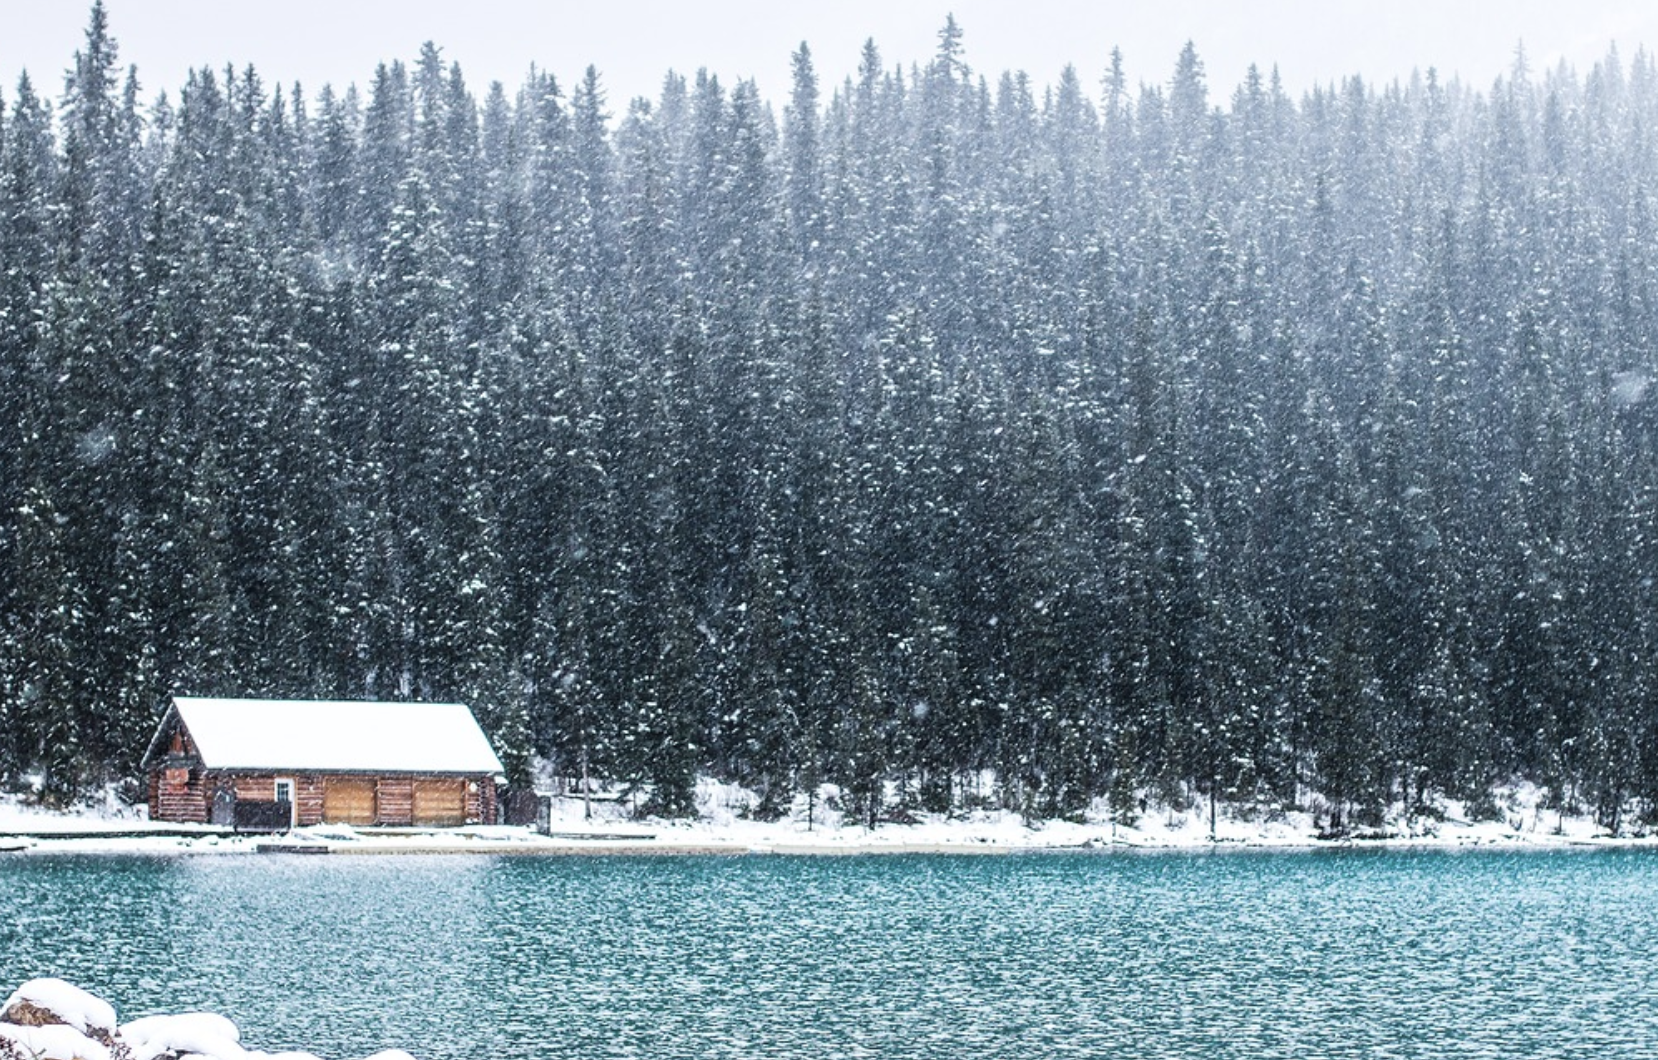 a cabin by a lake with snow falling